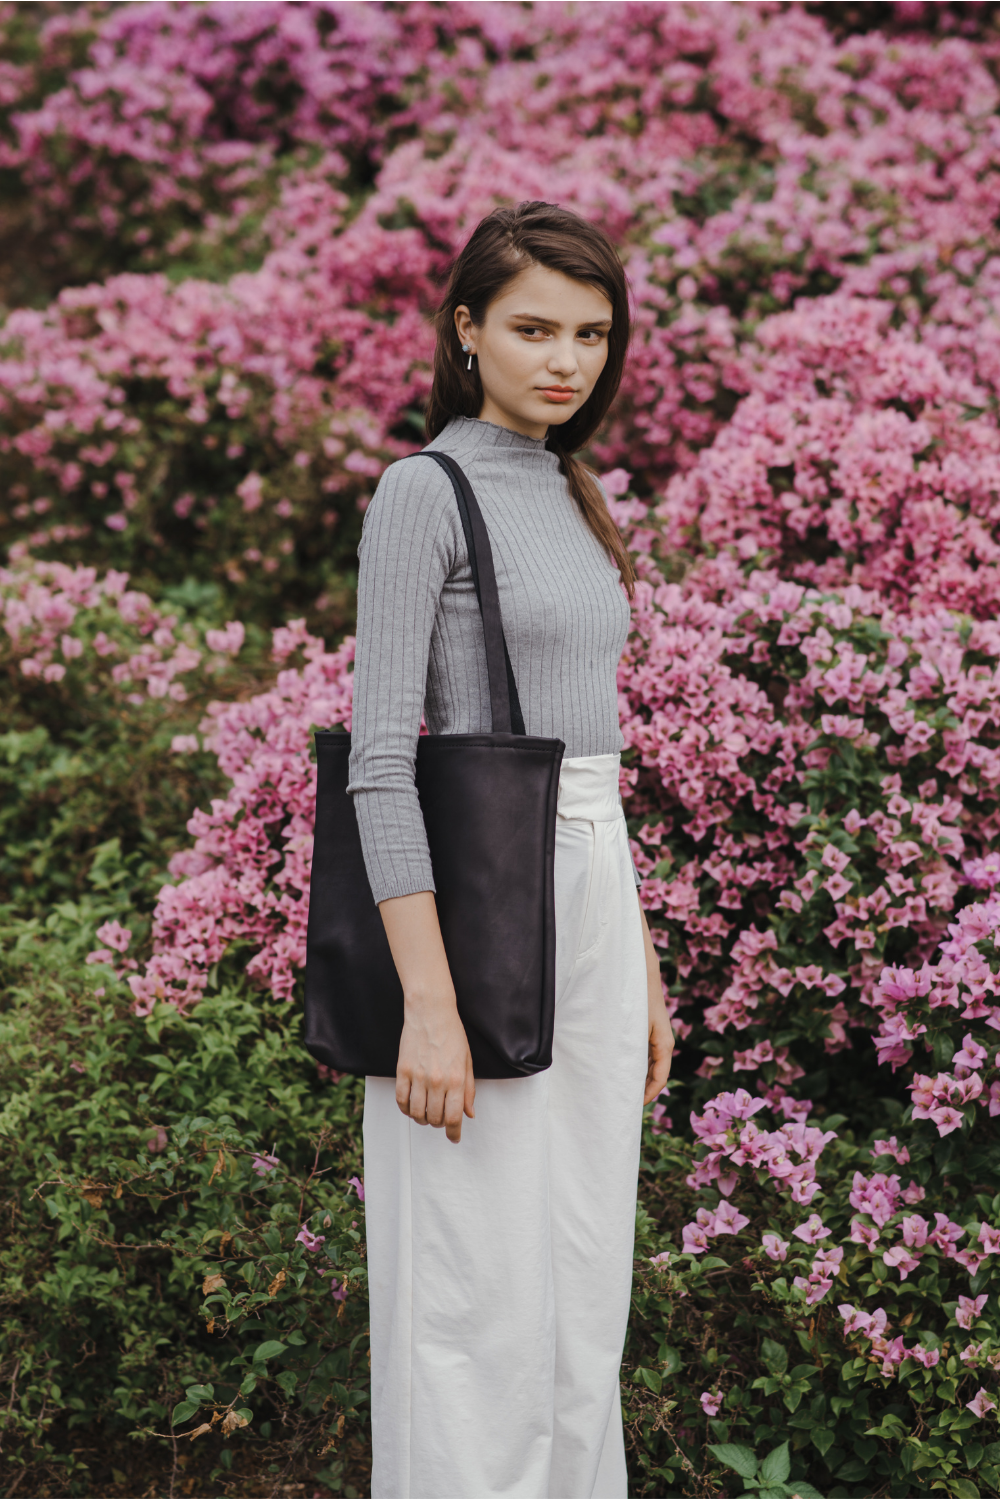 Artisan & Fox - Clutches & Bags - SACH Leather Tote Bag in Black - Handcrafted in Vietnam